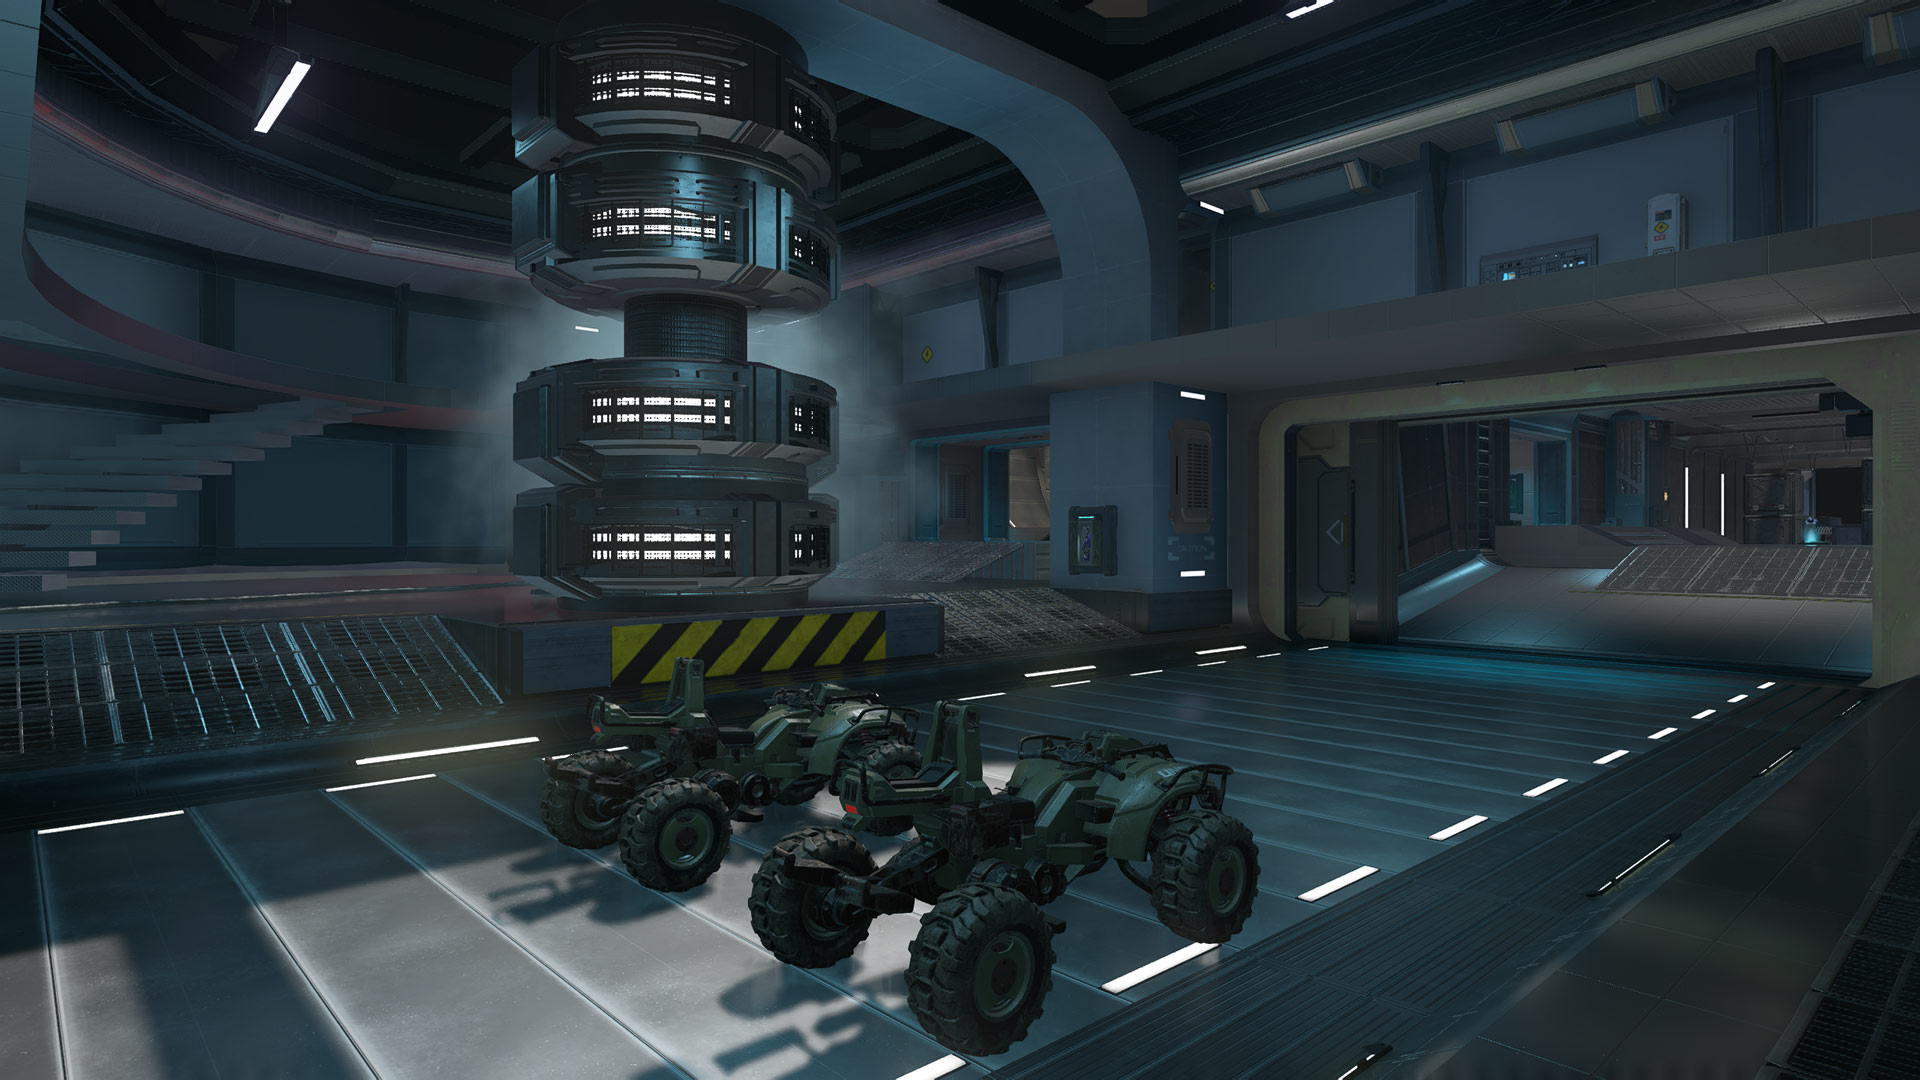 A Forge recreation of Halo 3's Orbital.